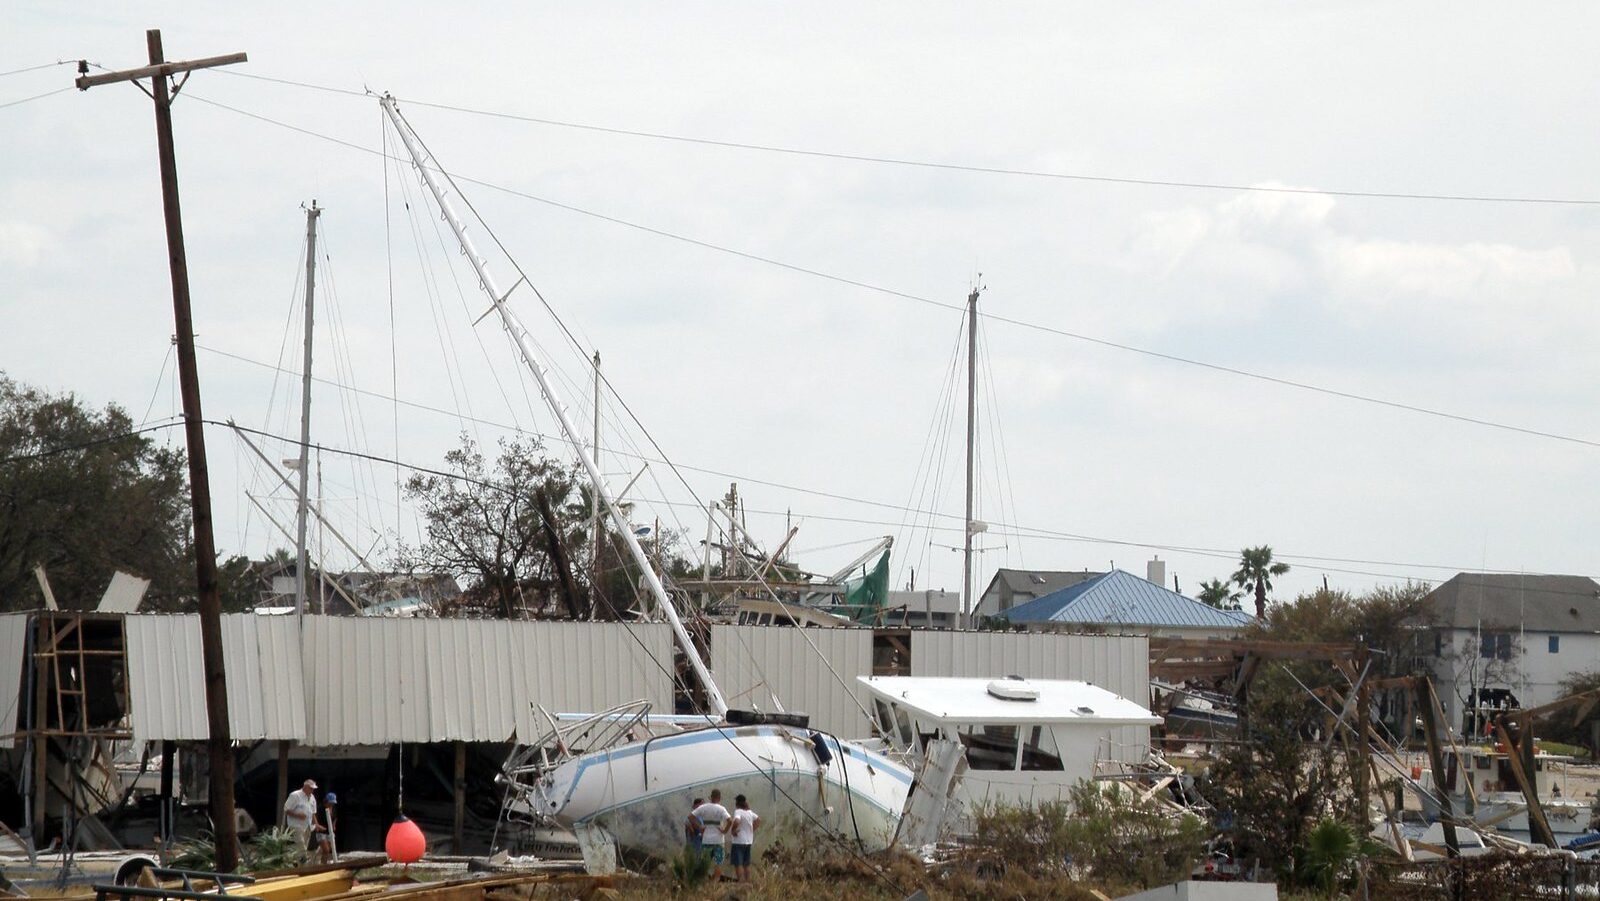 Image of a boat stranded on land, leaning against a wind-destroyed structure and a power line, amid other debris, including destroyed buildings and cars. Three people stand next to the boat observing the damage.